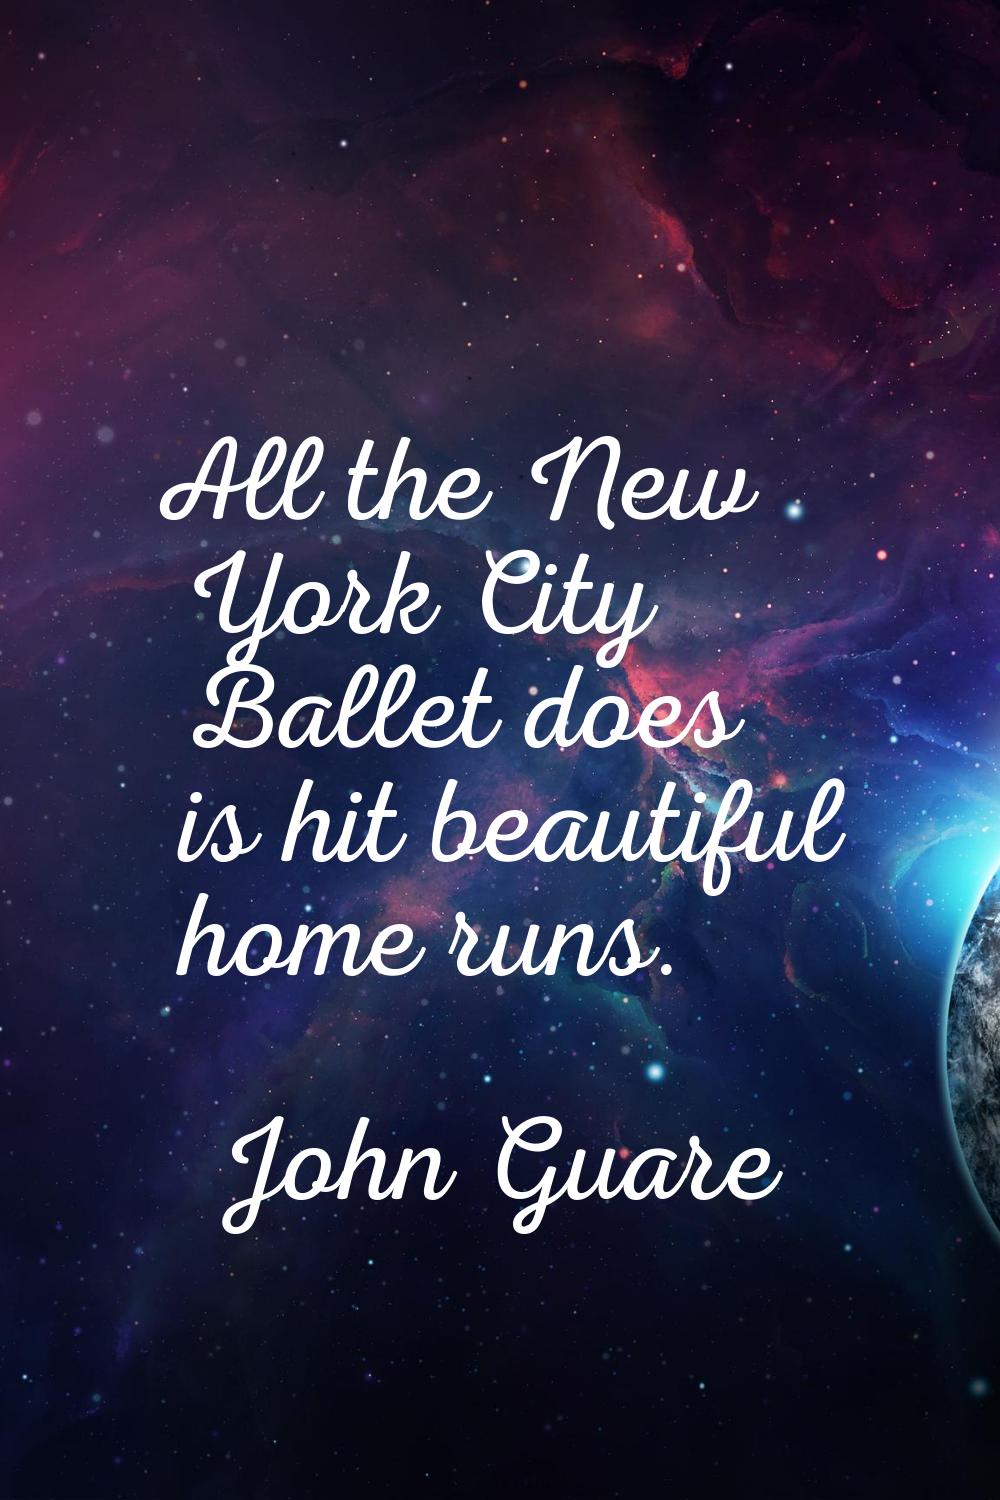 All the New York City Ballet does is hit beautiful home runs.